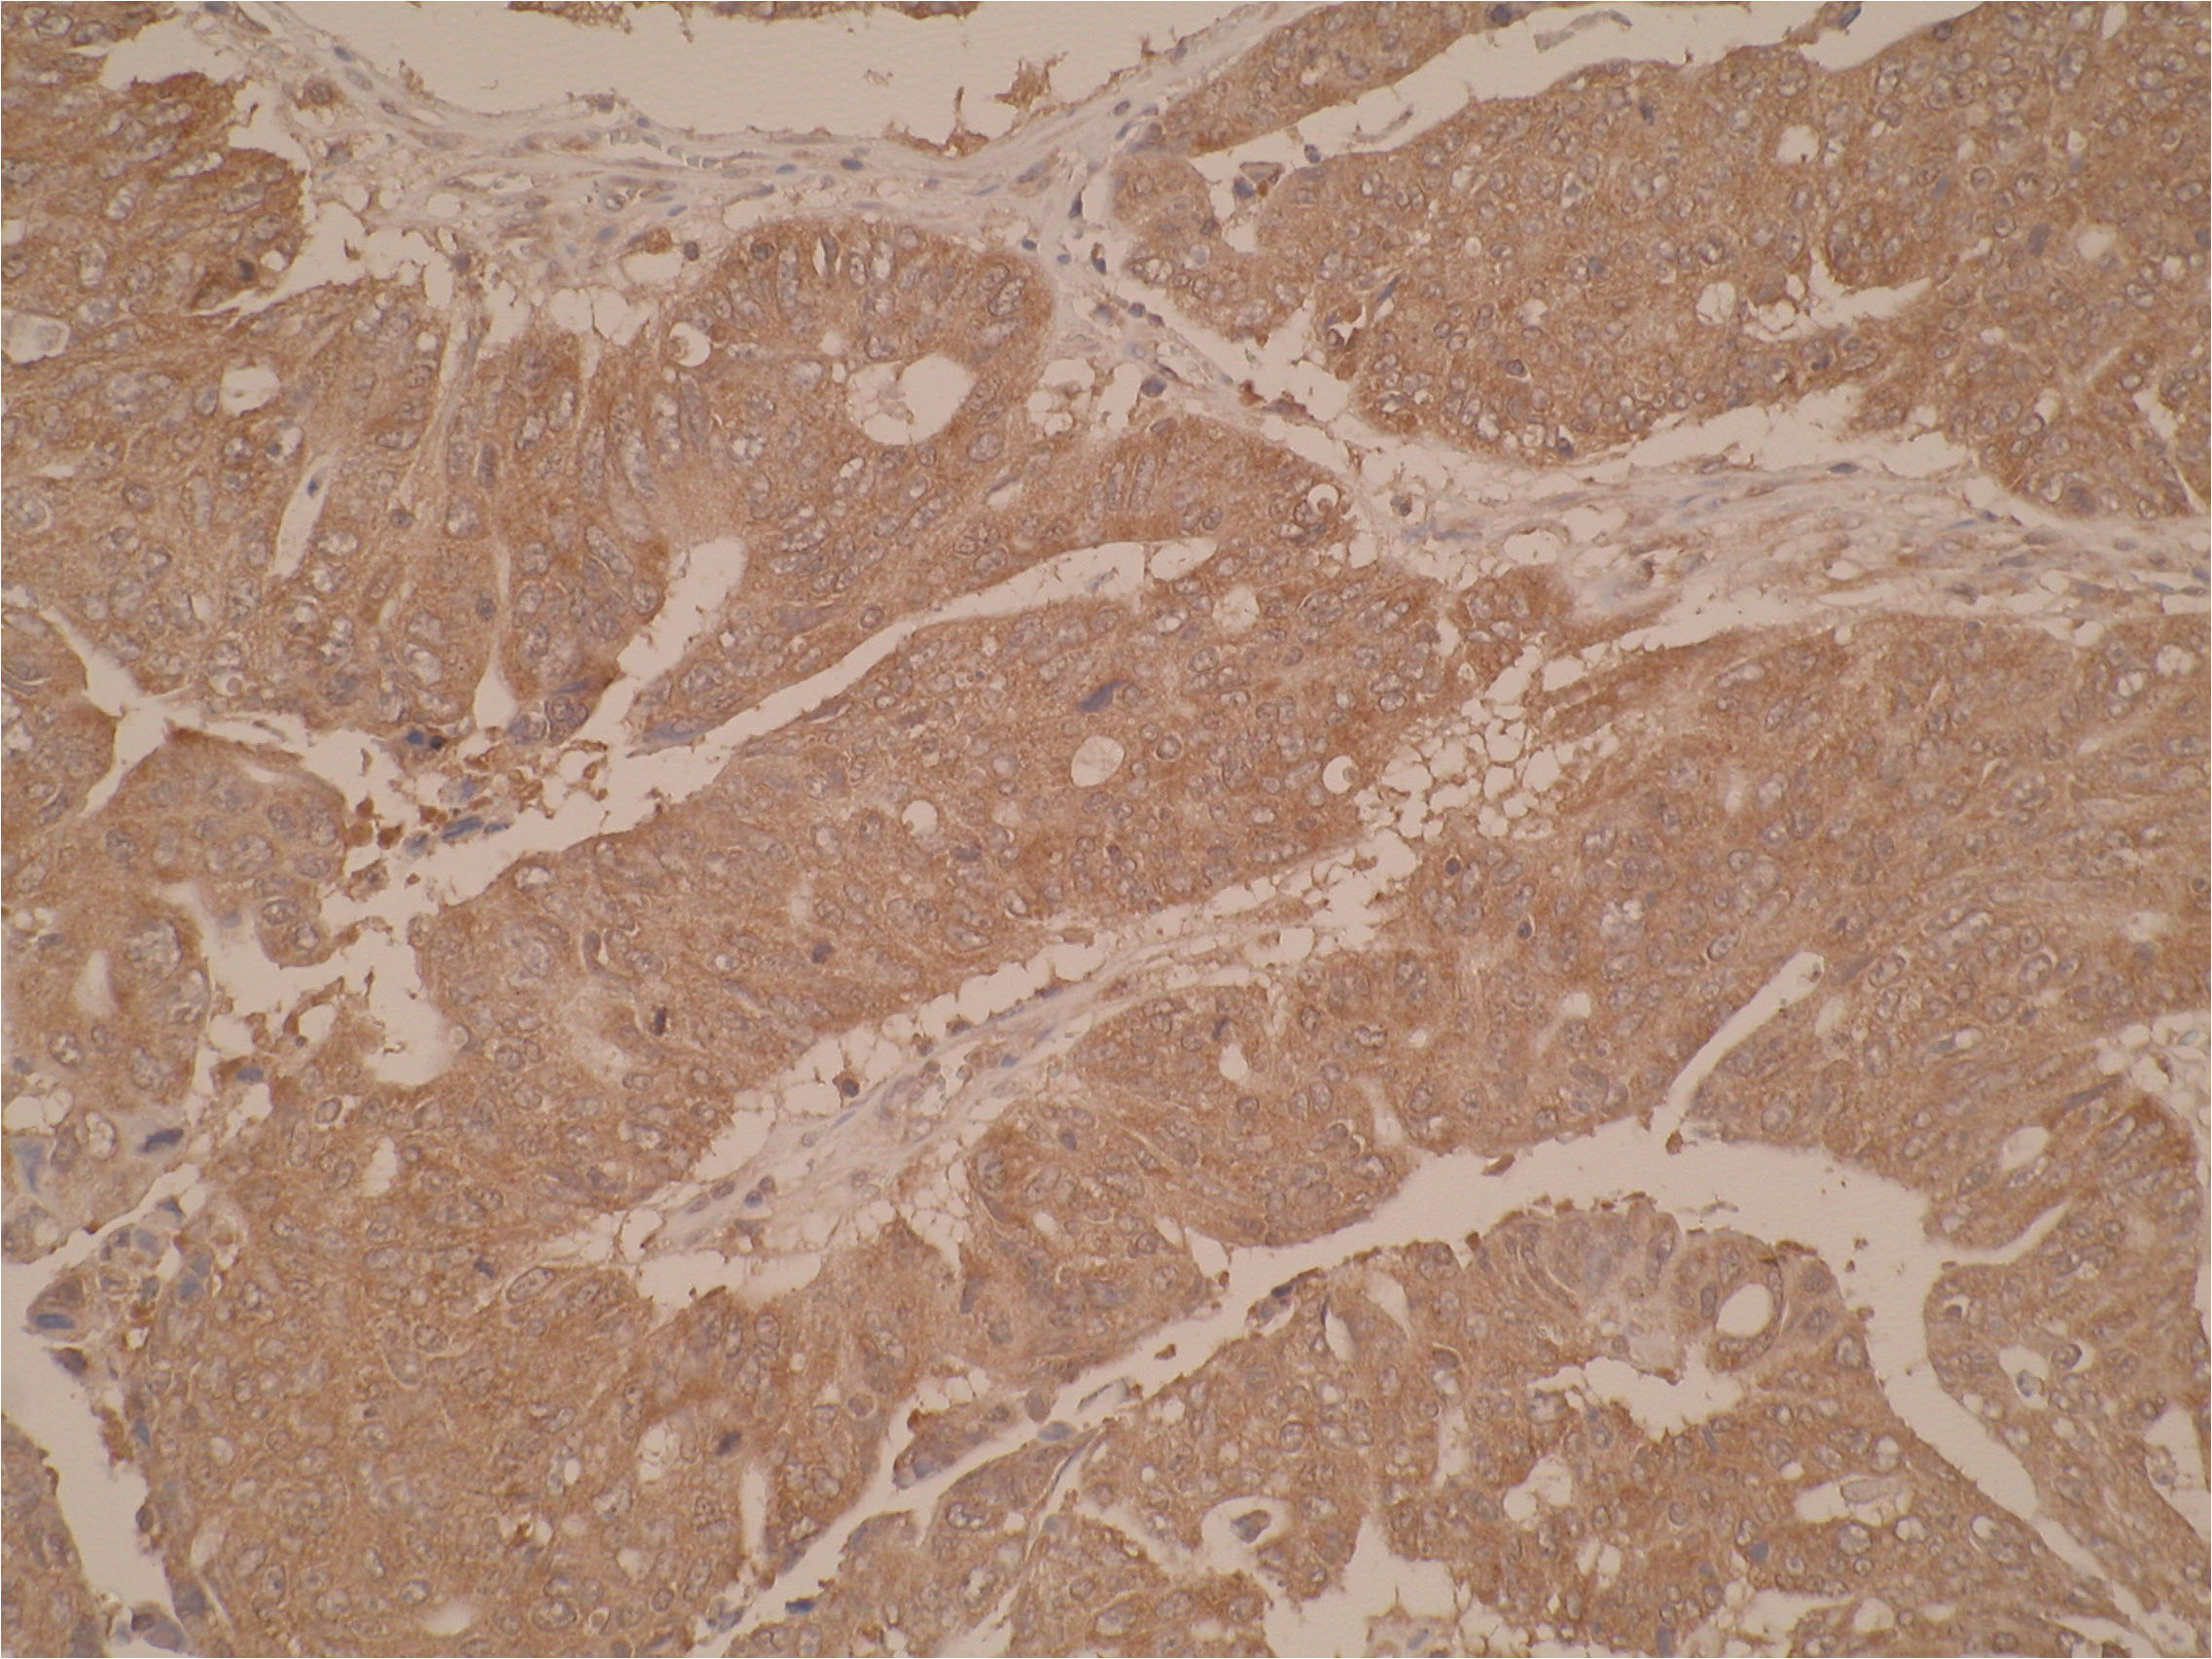 Immunohistochemistry was performed using formalin-fixed, paraffin-embedded tissue sections of human colon carcinoma using anti-Cytochrome P450 2W1 [V32-P5E5]. Strong cytoplasmic staining is shown as expected. The antibody showed no or weak staining in another non-cancerous tissue (data not shown).